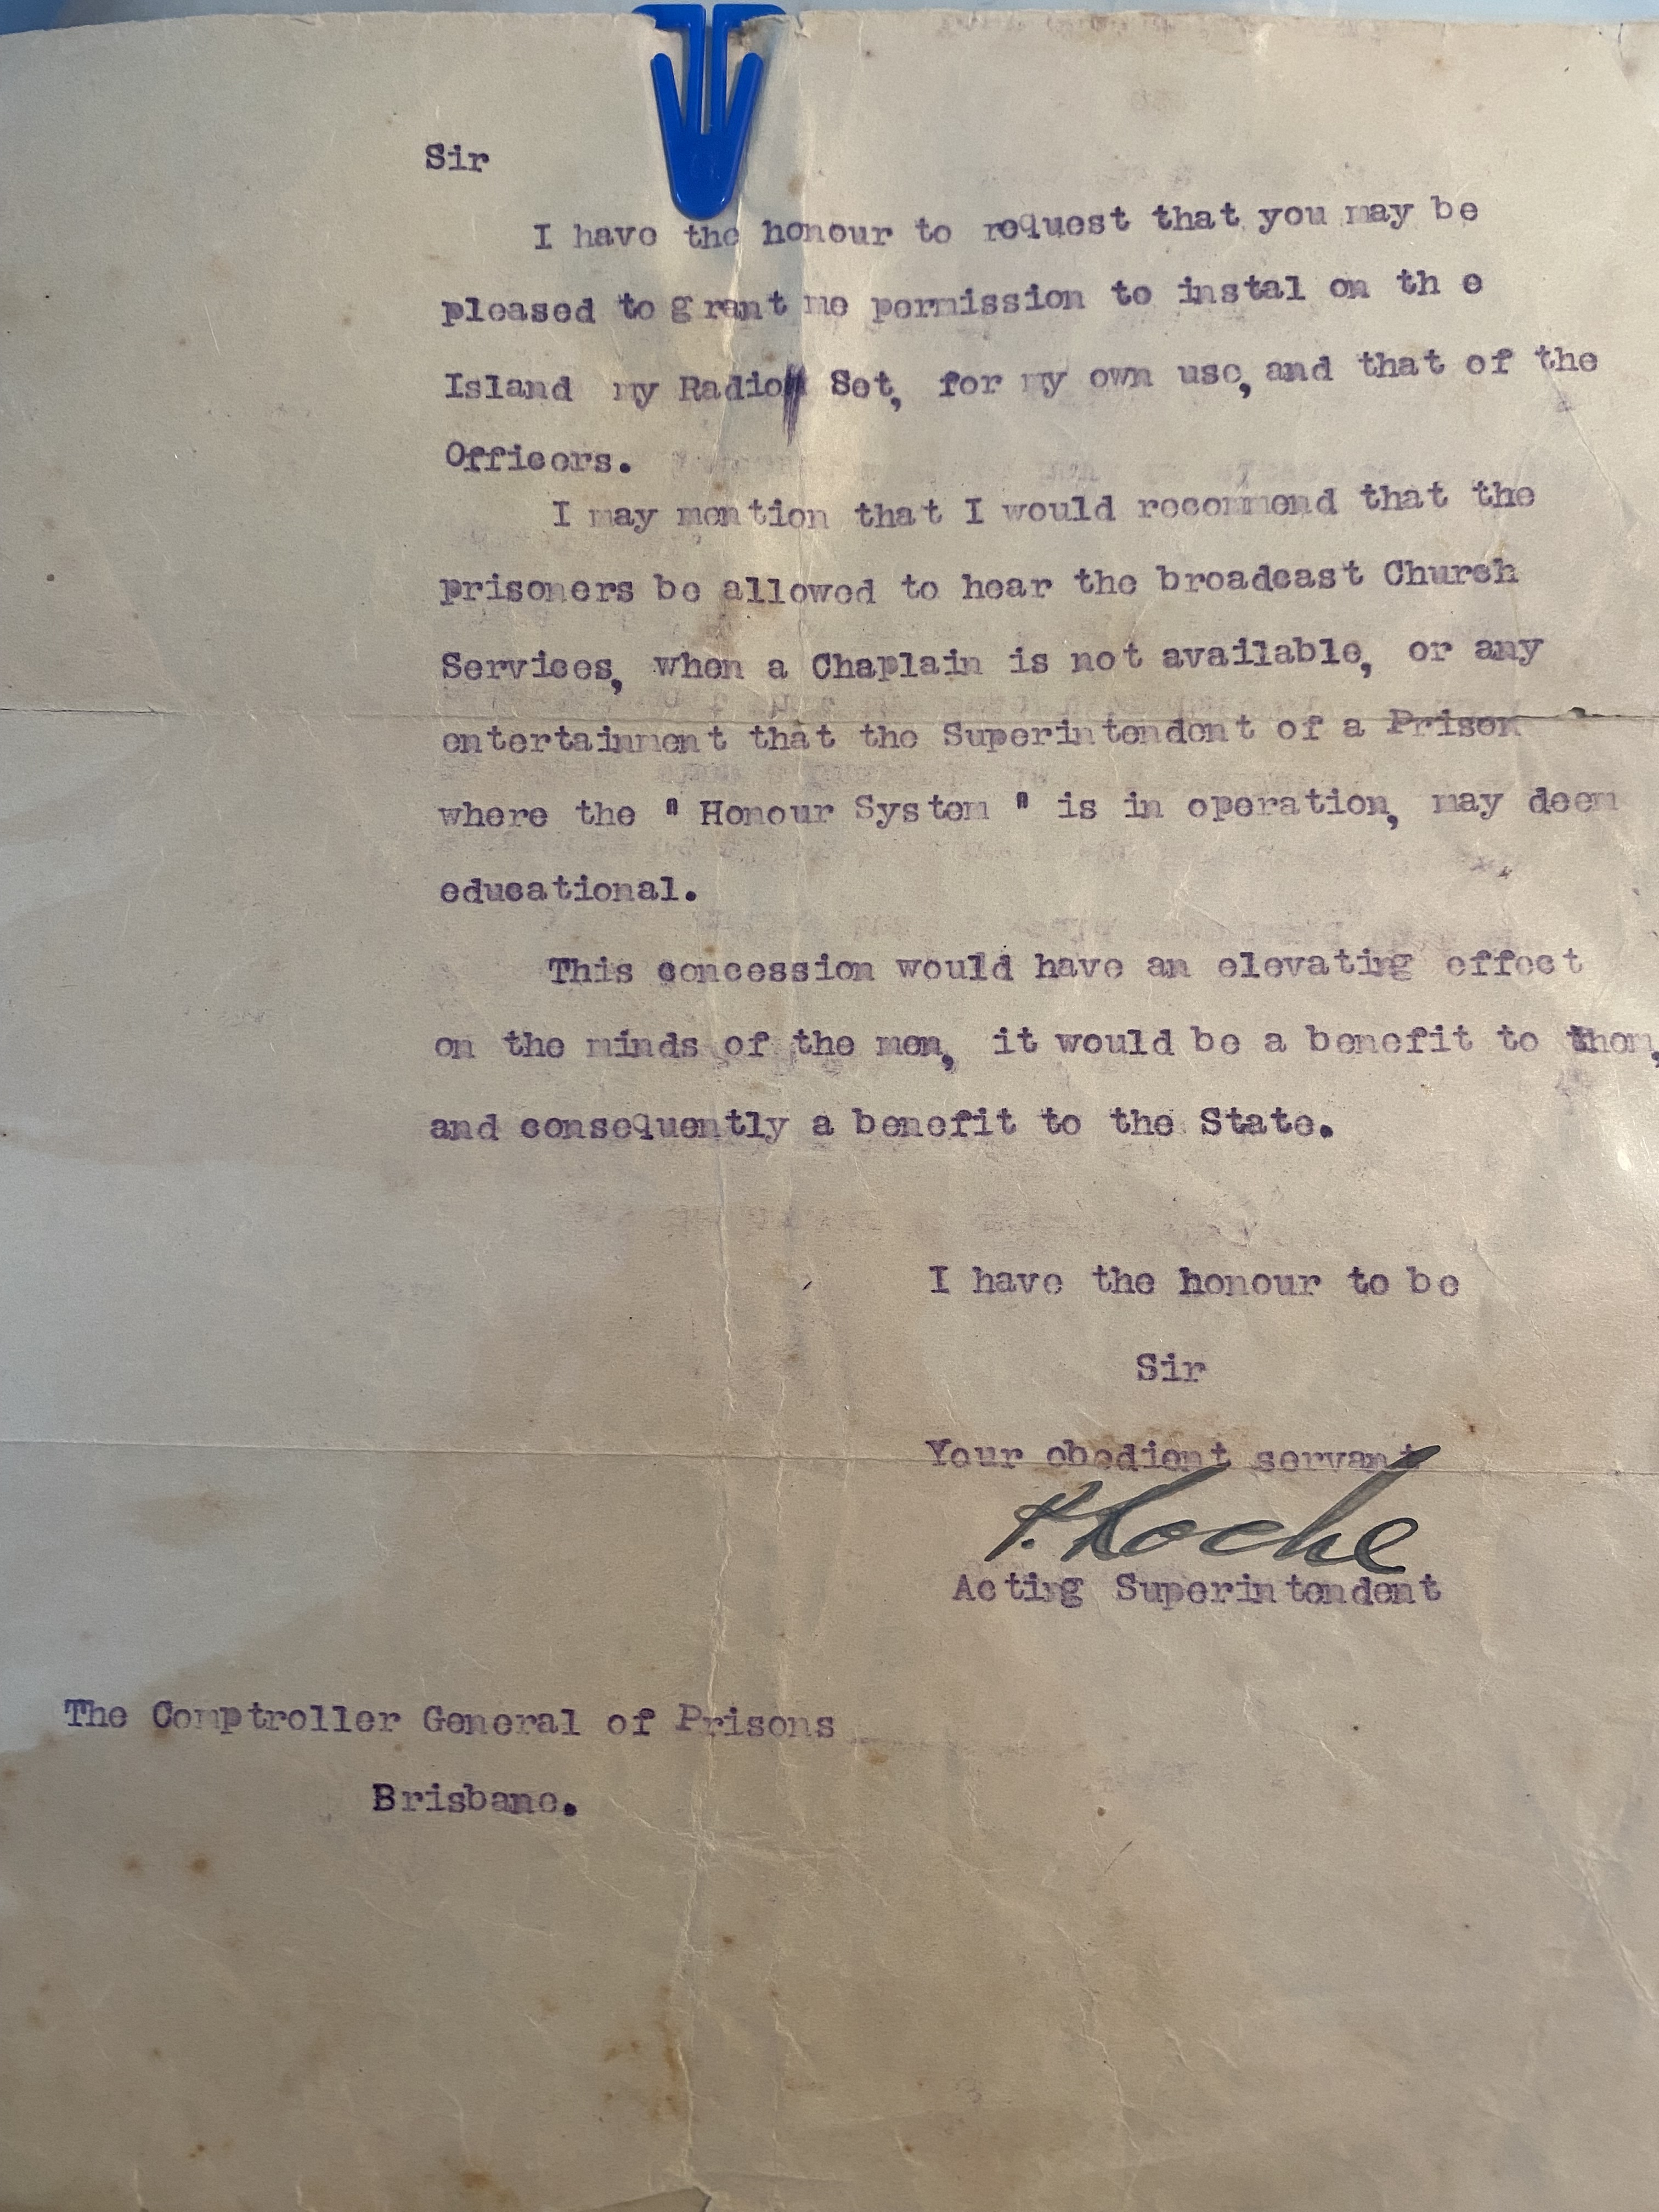 Letter from acting superintendent Patrick Roche to Comptroller General of Prisons, Brisbane requesting a radio for the St Helena Establishment, 1927.